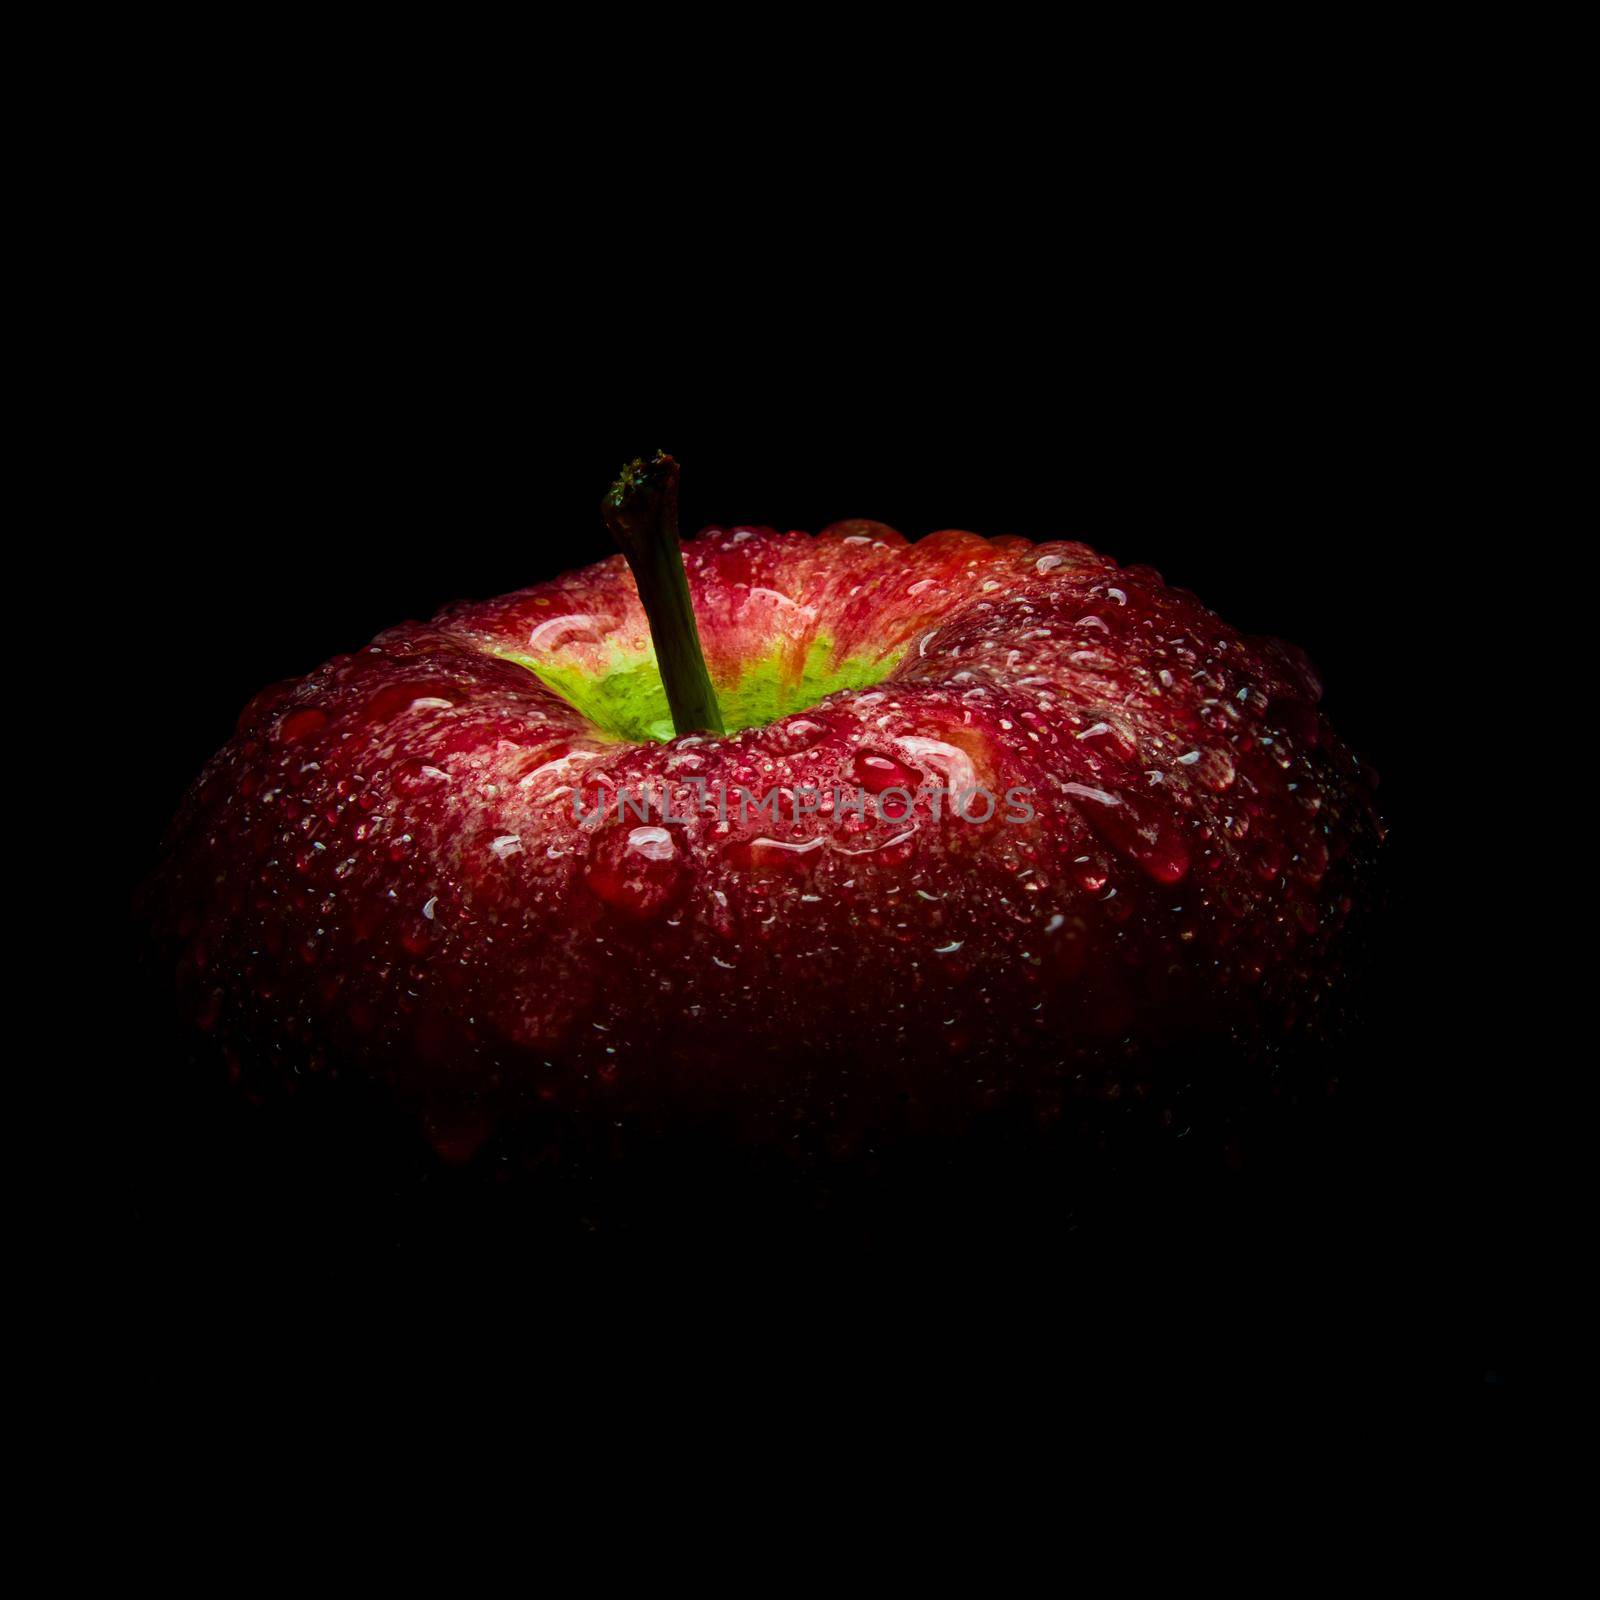 Water droplet on glossy surface of red apple on black background by Satakorn